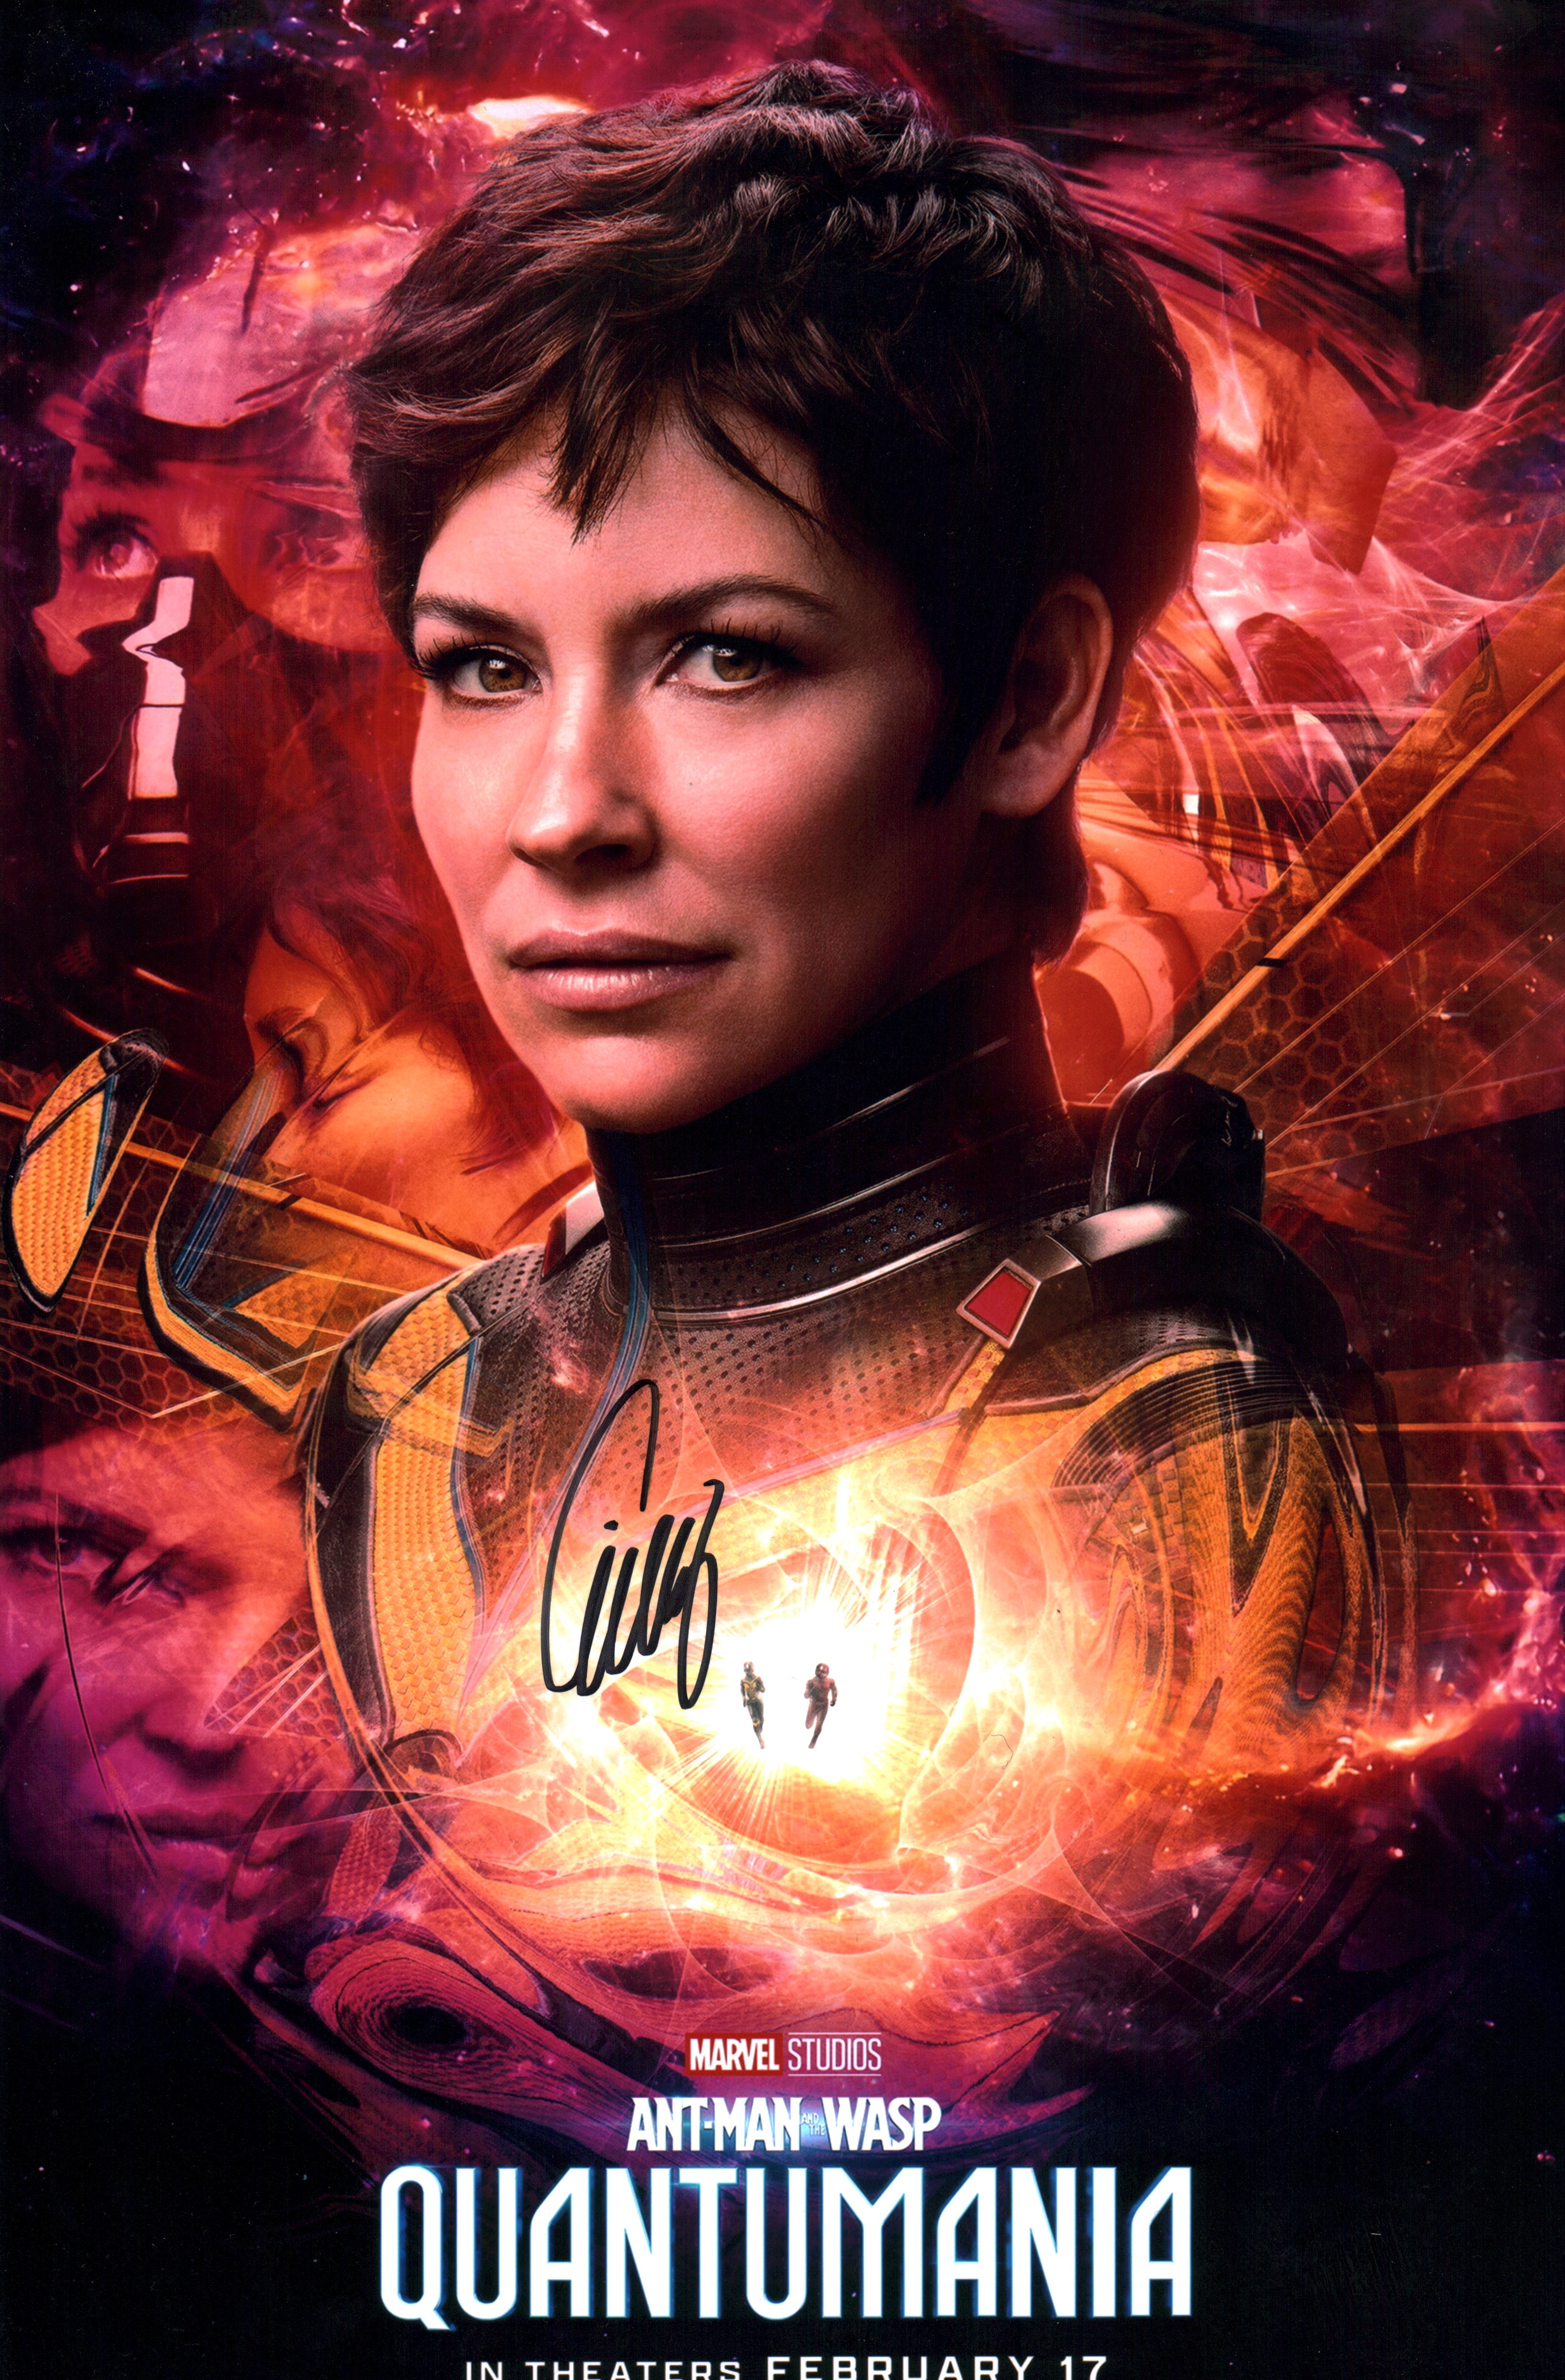 Evangeline Lilly Ant-Man and the Wasp 11x17 Signed Photo Poster JSA Certified Autograph